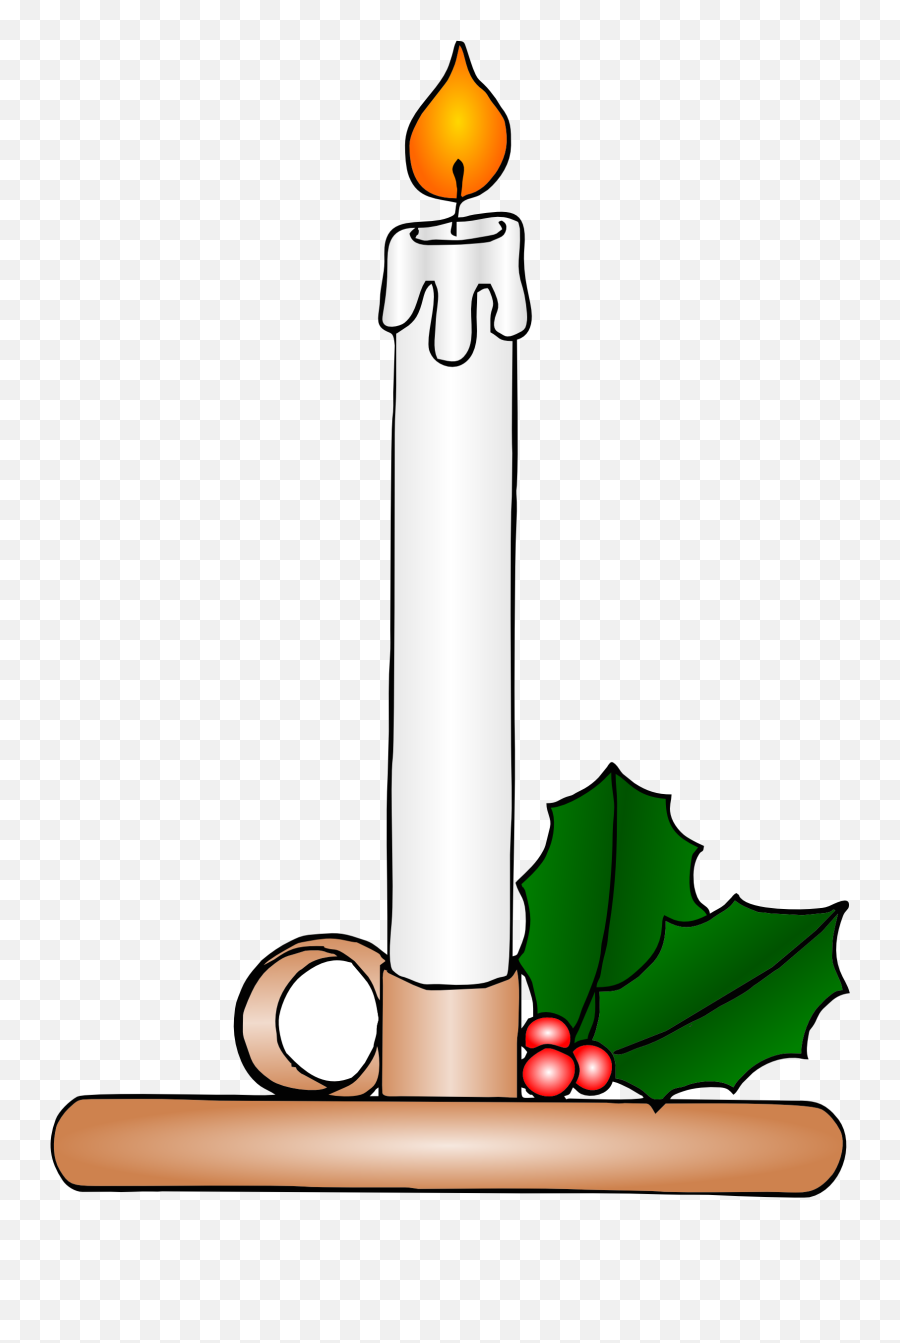 Candle Vector Clipart 2 - Clipartix Christmas Candle Clipart Emoji,Emoji Candle